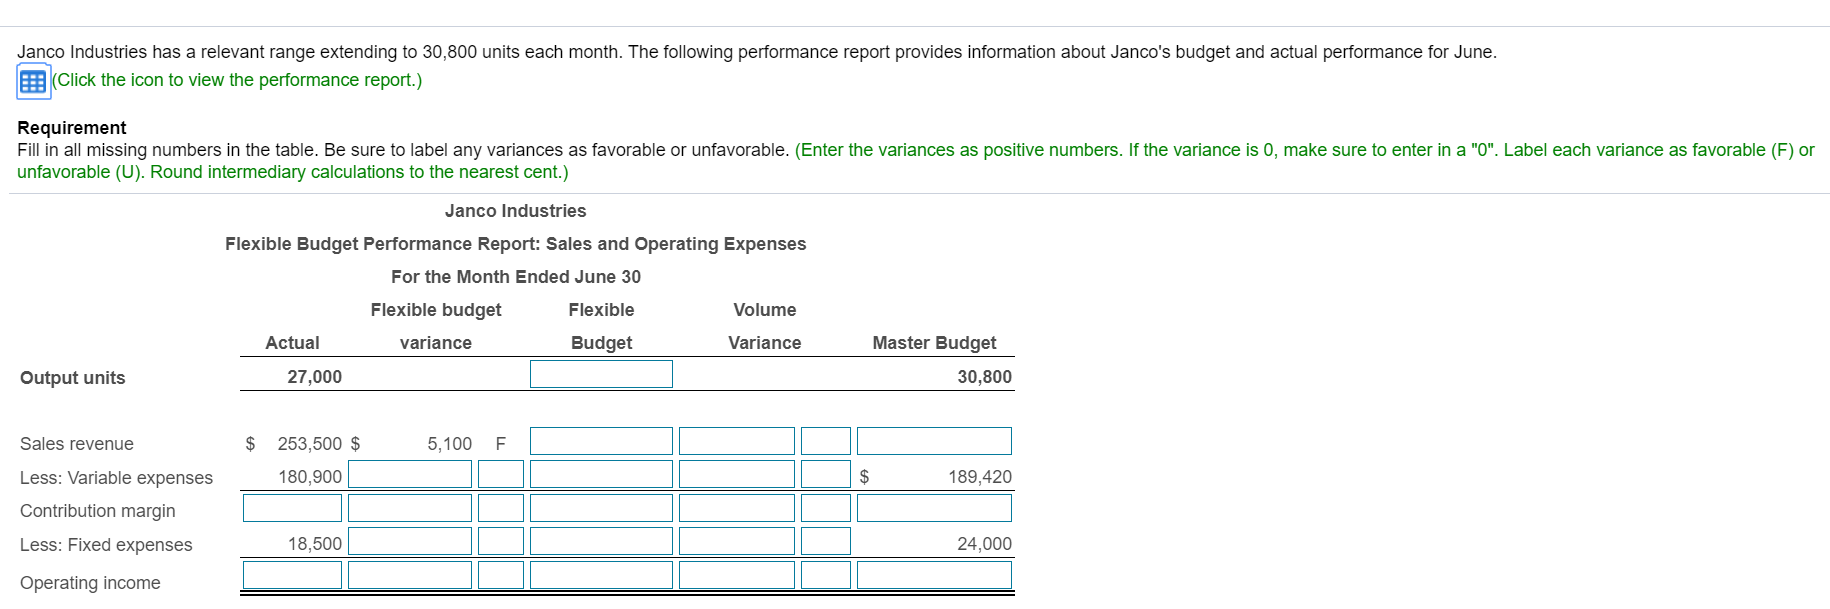 Janco Industries has a relevant range extending to 30,800 units each month. The following performance report provides information about Janco's budget and actual performance for June.
EEB(Click the icon to view the performance report.)
Requirement
Fill in all missing numbers in the table. Be sure to label any variances as favorable or unfavorable. (Enter the variances as positive numbers. If the variance is 0, make sure to enter in a "0". Label each variance as favorable (F) or
unfavorable (U). Round intermediary calculations to the nearest cent.)
Janco Industries
Flexible Budget Performance Report: Sales and Operating Expenses
For the Month Ended June 30
Flexible budget
Flexible
Volume
Master Budget
Budget
Actual
variance
Variance
27,000
Output units
30,800
Sales revenue
$
253,500 $
5,100 F
Less: Variable expenses
$
180,900
189,420
Contribution margin
Less: Fixed expenses
18,500
24,000
Operating income
